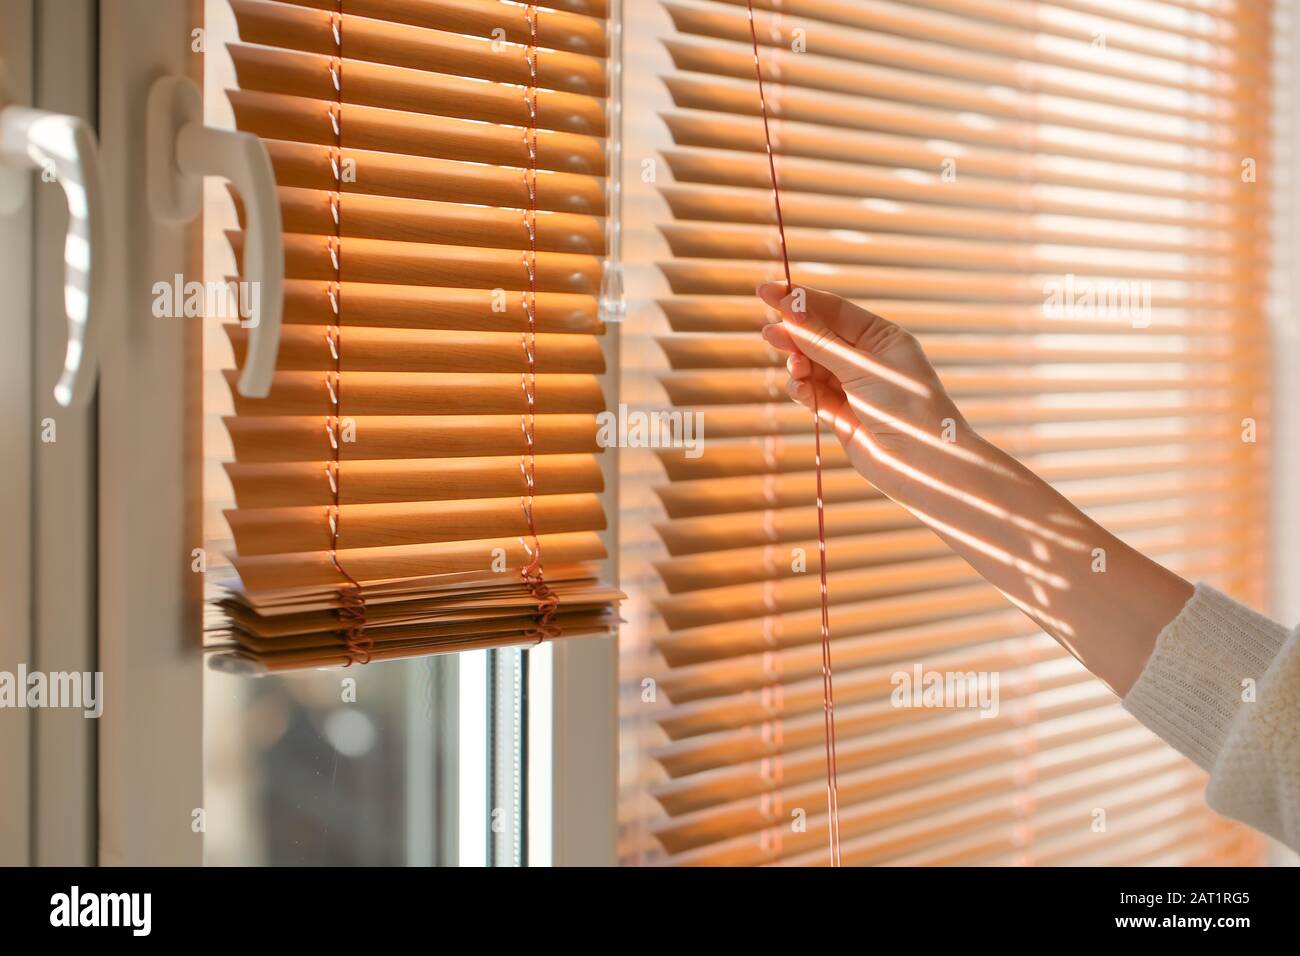 Woman opening blinds on window Stock Photo